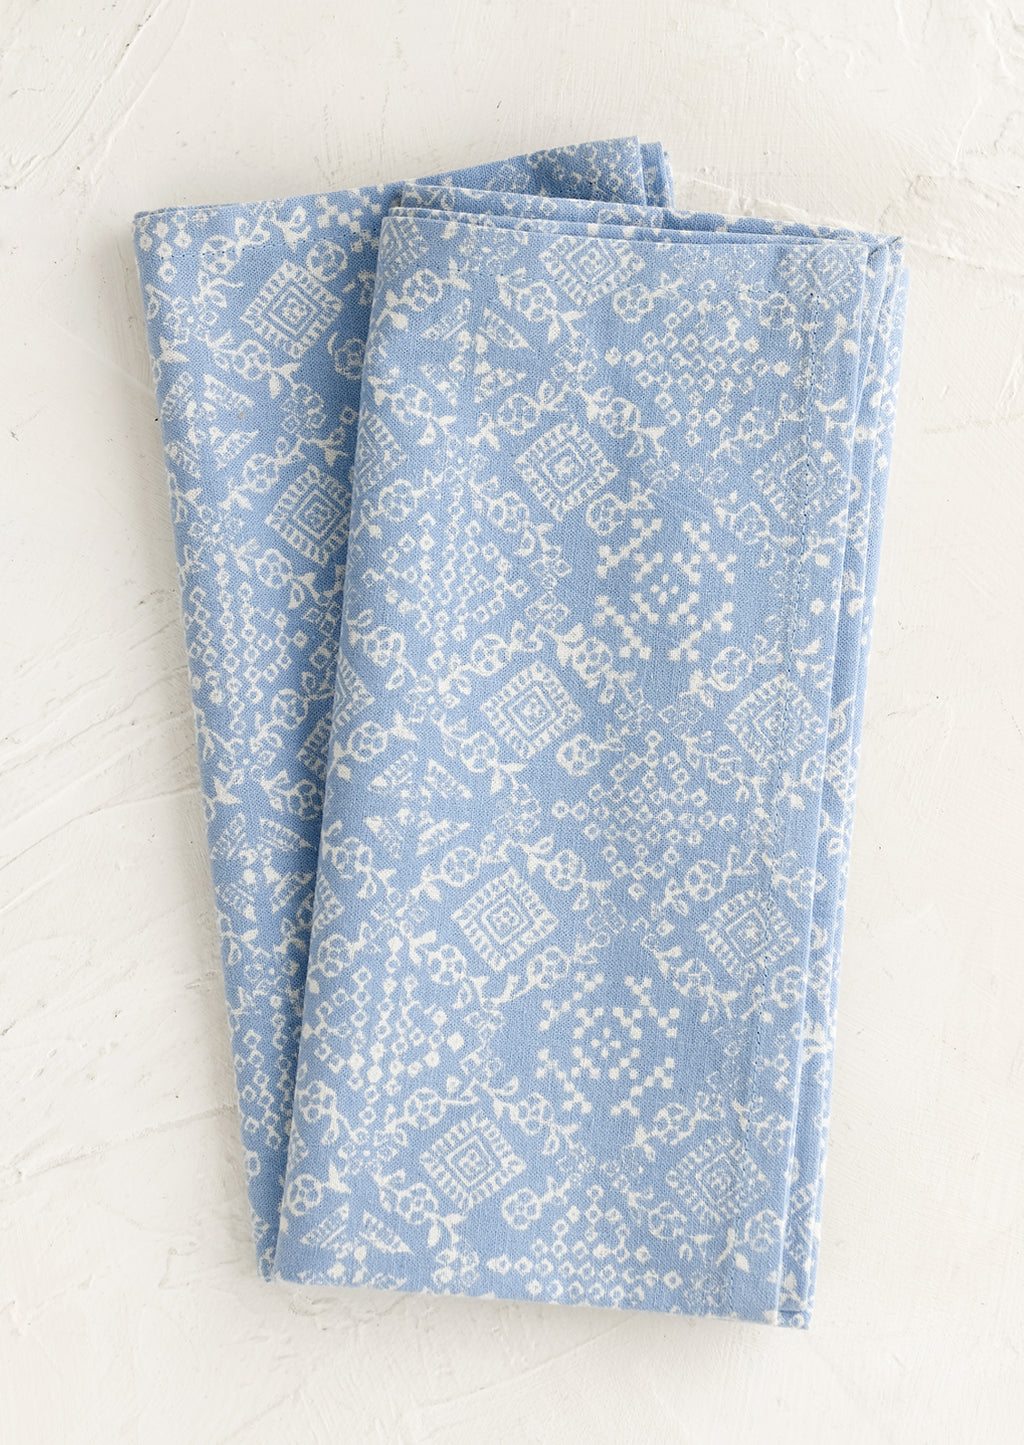 Powder Blue: A pair of blue napkins with white tile print.